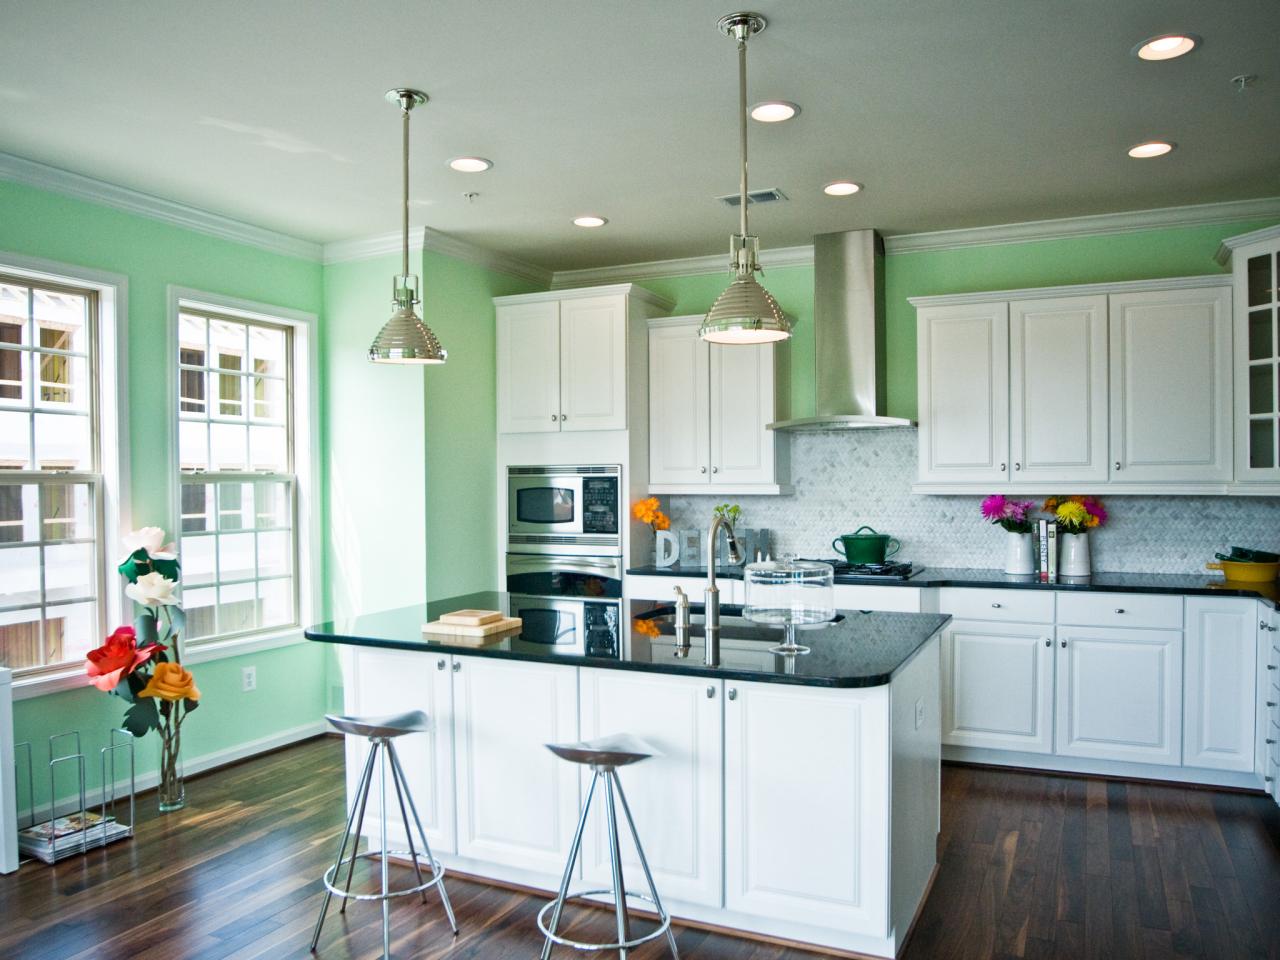 Shaker Kitchen Cabinets: Pictures, Ideas & Tips From HGTV | HGTV